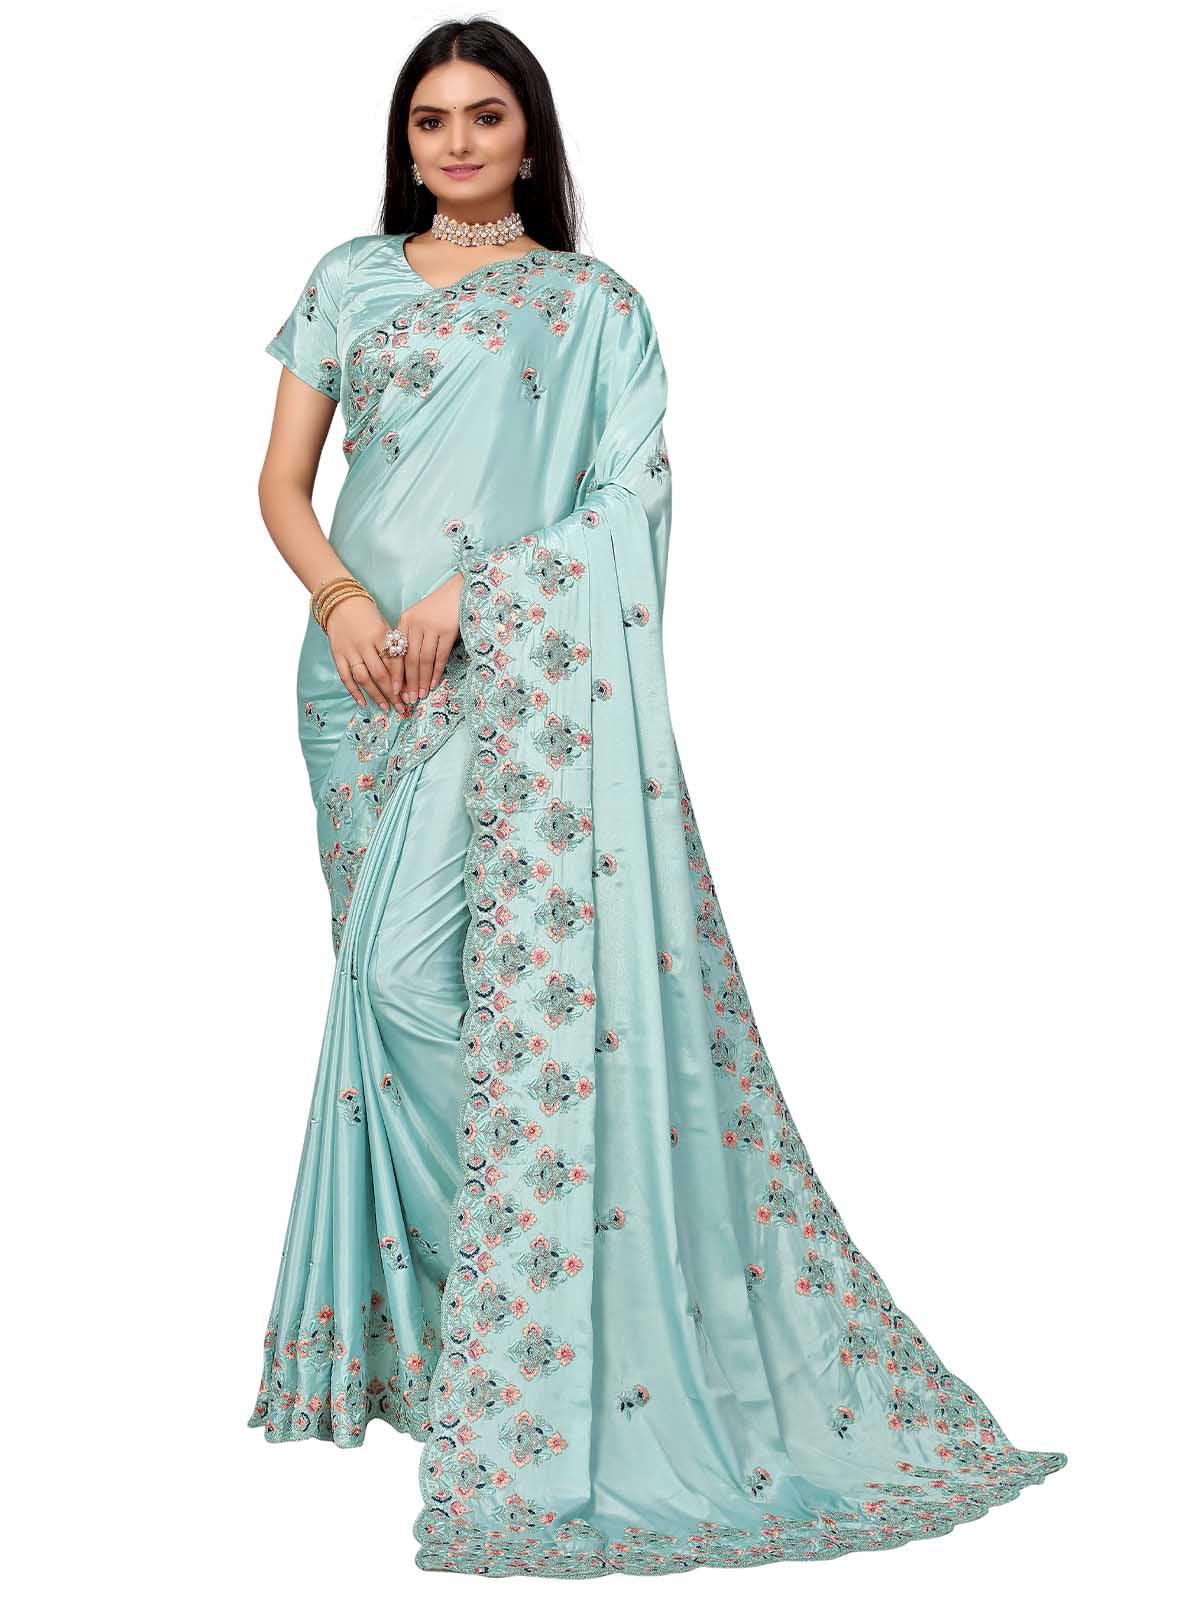 Women's Light Blue Pure Silk Embroidered Saree With Blouse - Odette